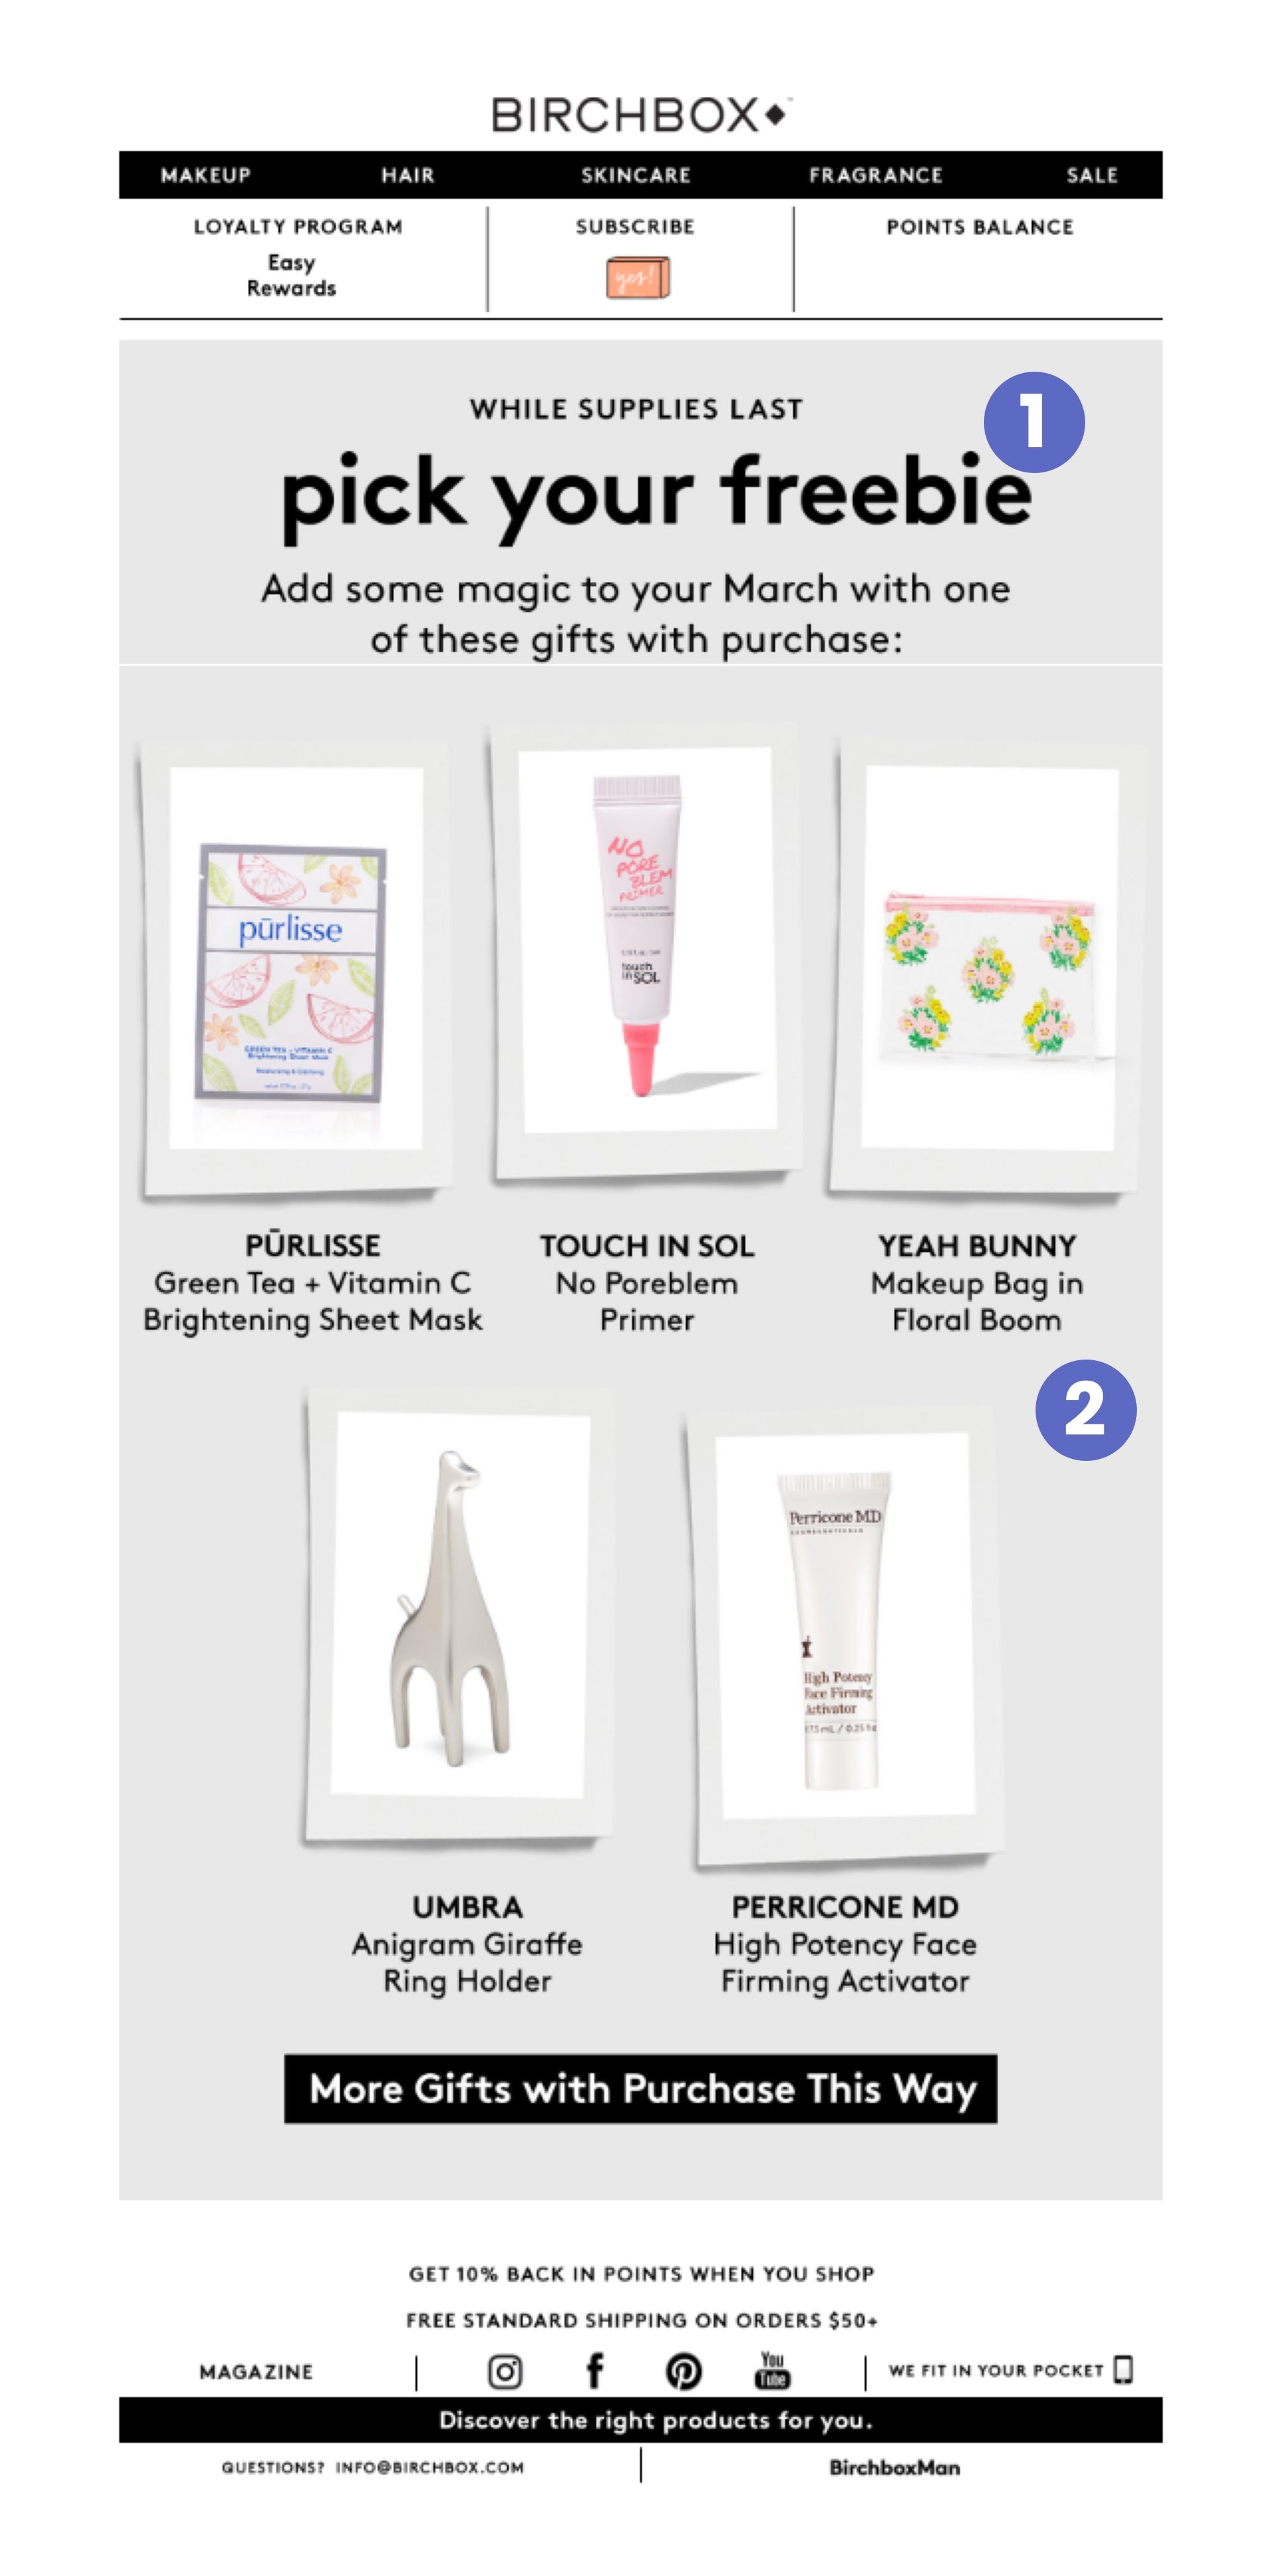 An ecommerce email marketing example from Birchbox